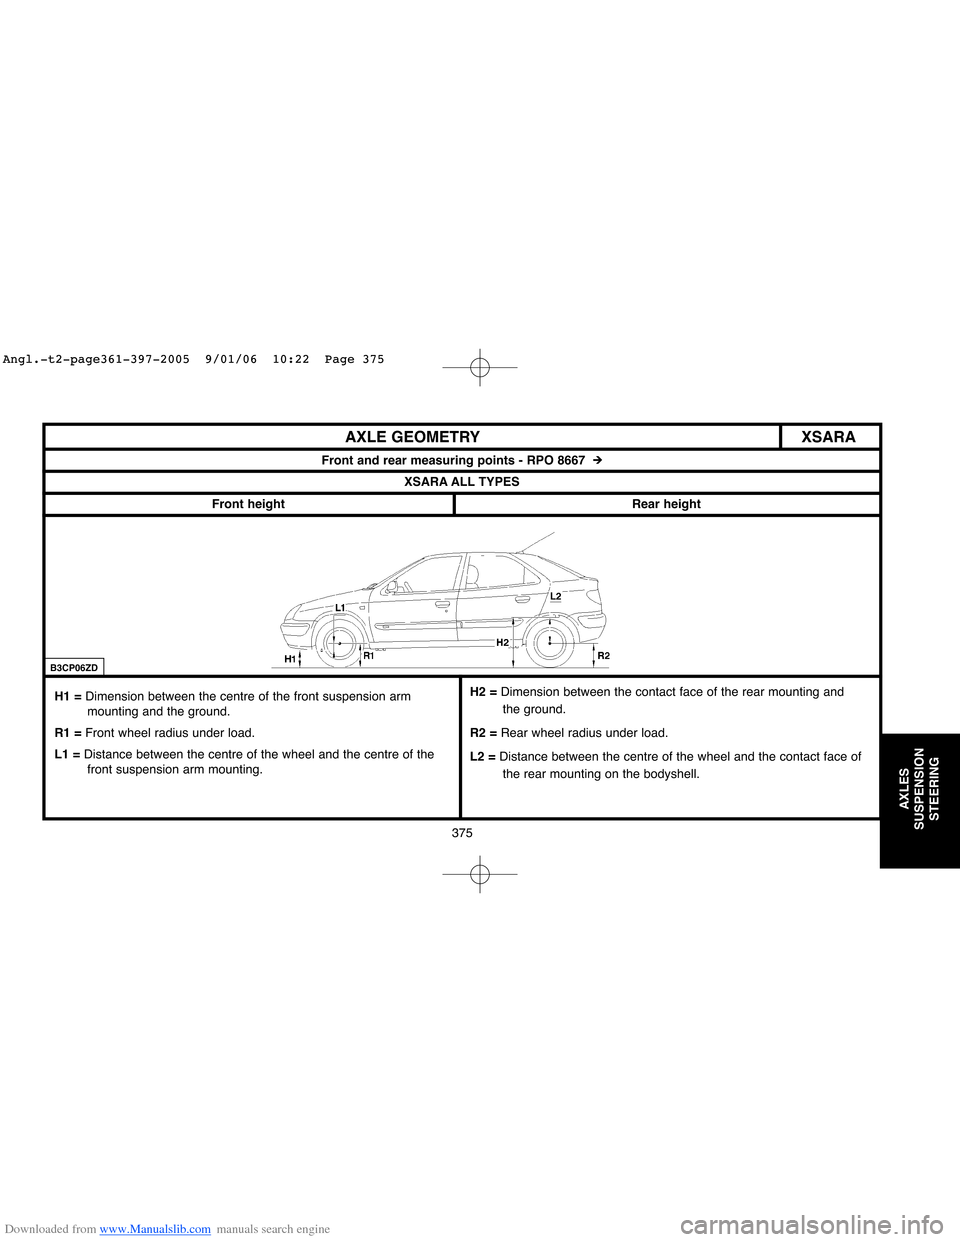 Citroen BERLINGO 2005 1.G Workshop Manual Downloaded from www.Manualslib.com manuals search engine 375
AXLES
SUSPENSION
STEERING
XSARA AXLE GEOMETRY
Front and rear measuring points - RPO 8667  #
XSARA ALL TYPES
Front height
Rear height
H1 = D